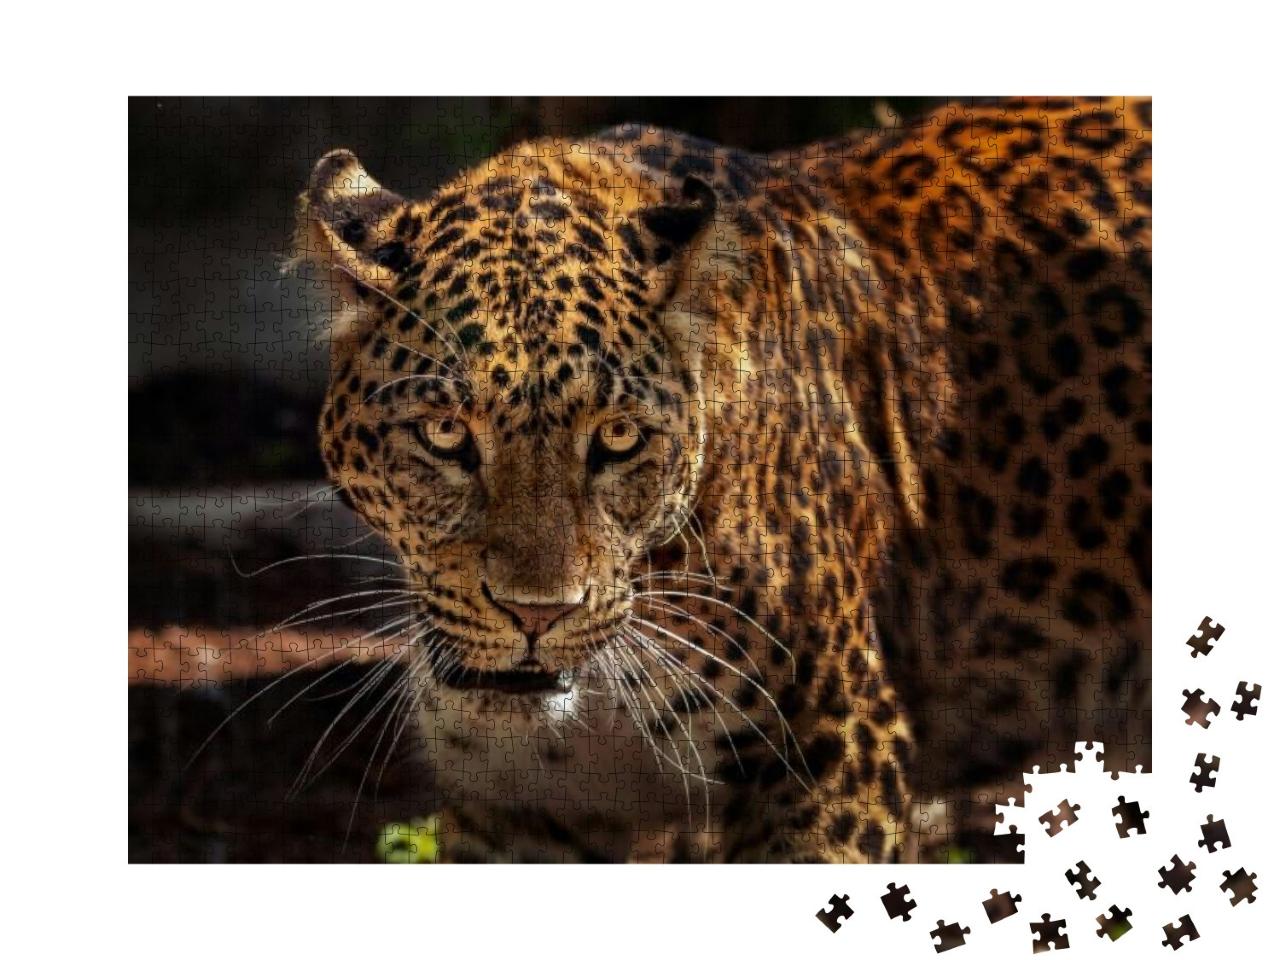 Attractive Image of a Powerful Hunter Jaguar... Jigsaw Puzzle with 1000 pieces